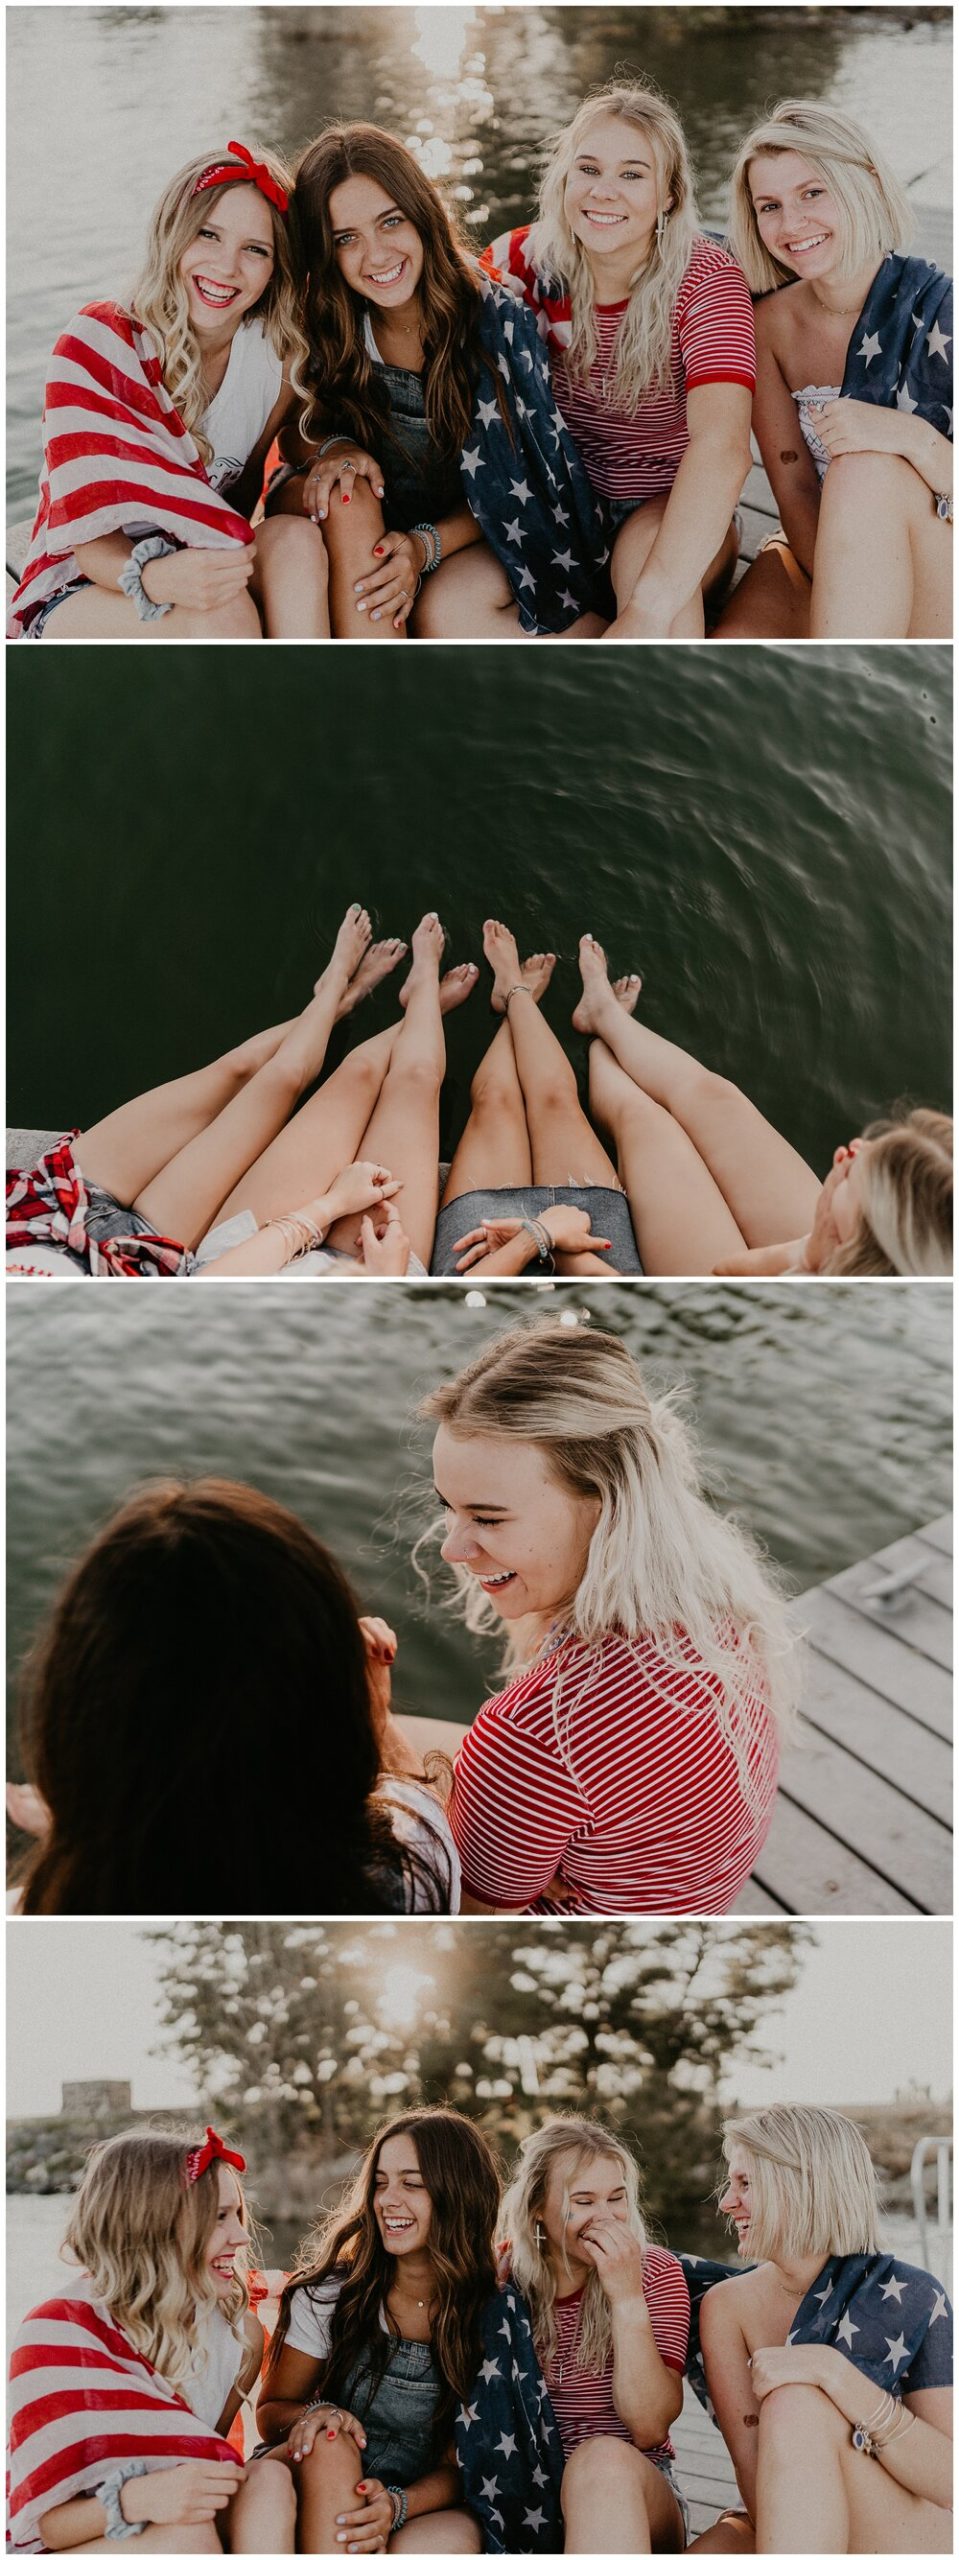 Boise senior photographer besties 4th of july styled session Lake Lowell summer vibes Idaho photography locations